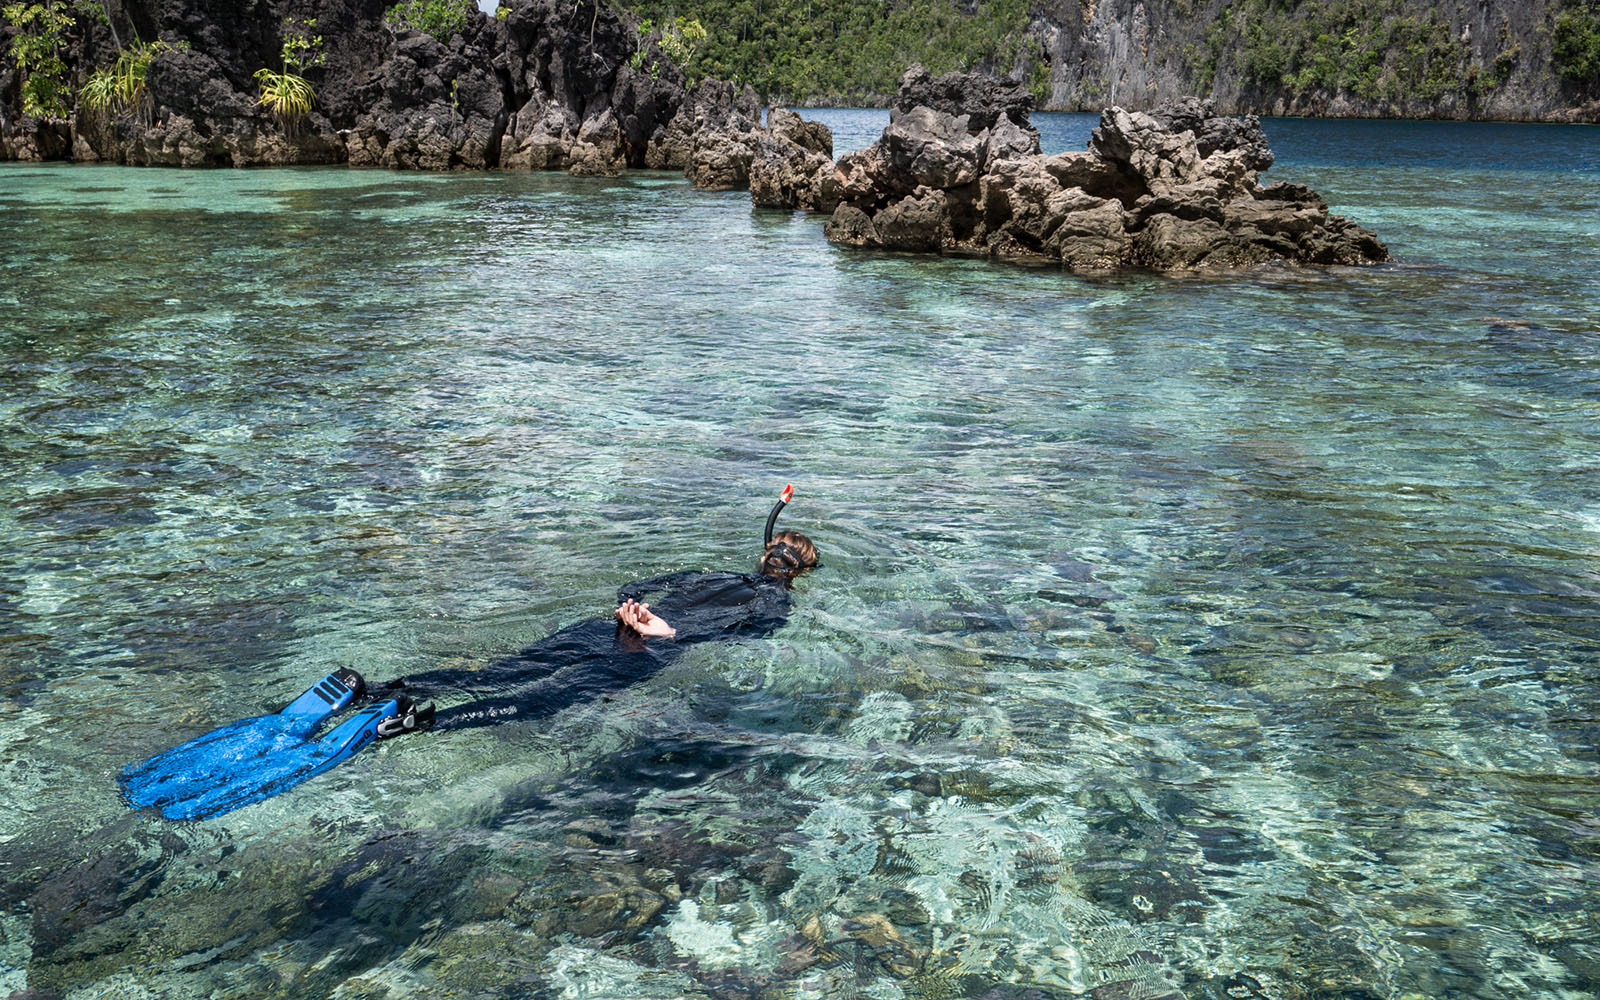 Snorkeler photographed by Snorkel Vacations on a snorkeling trip to Raja Ampat